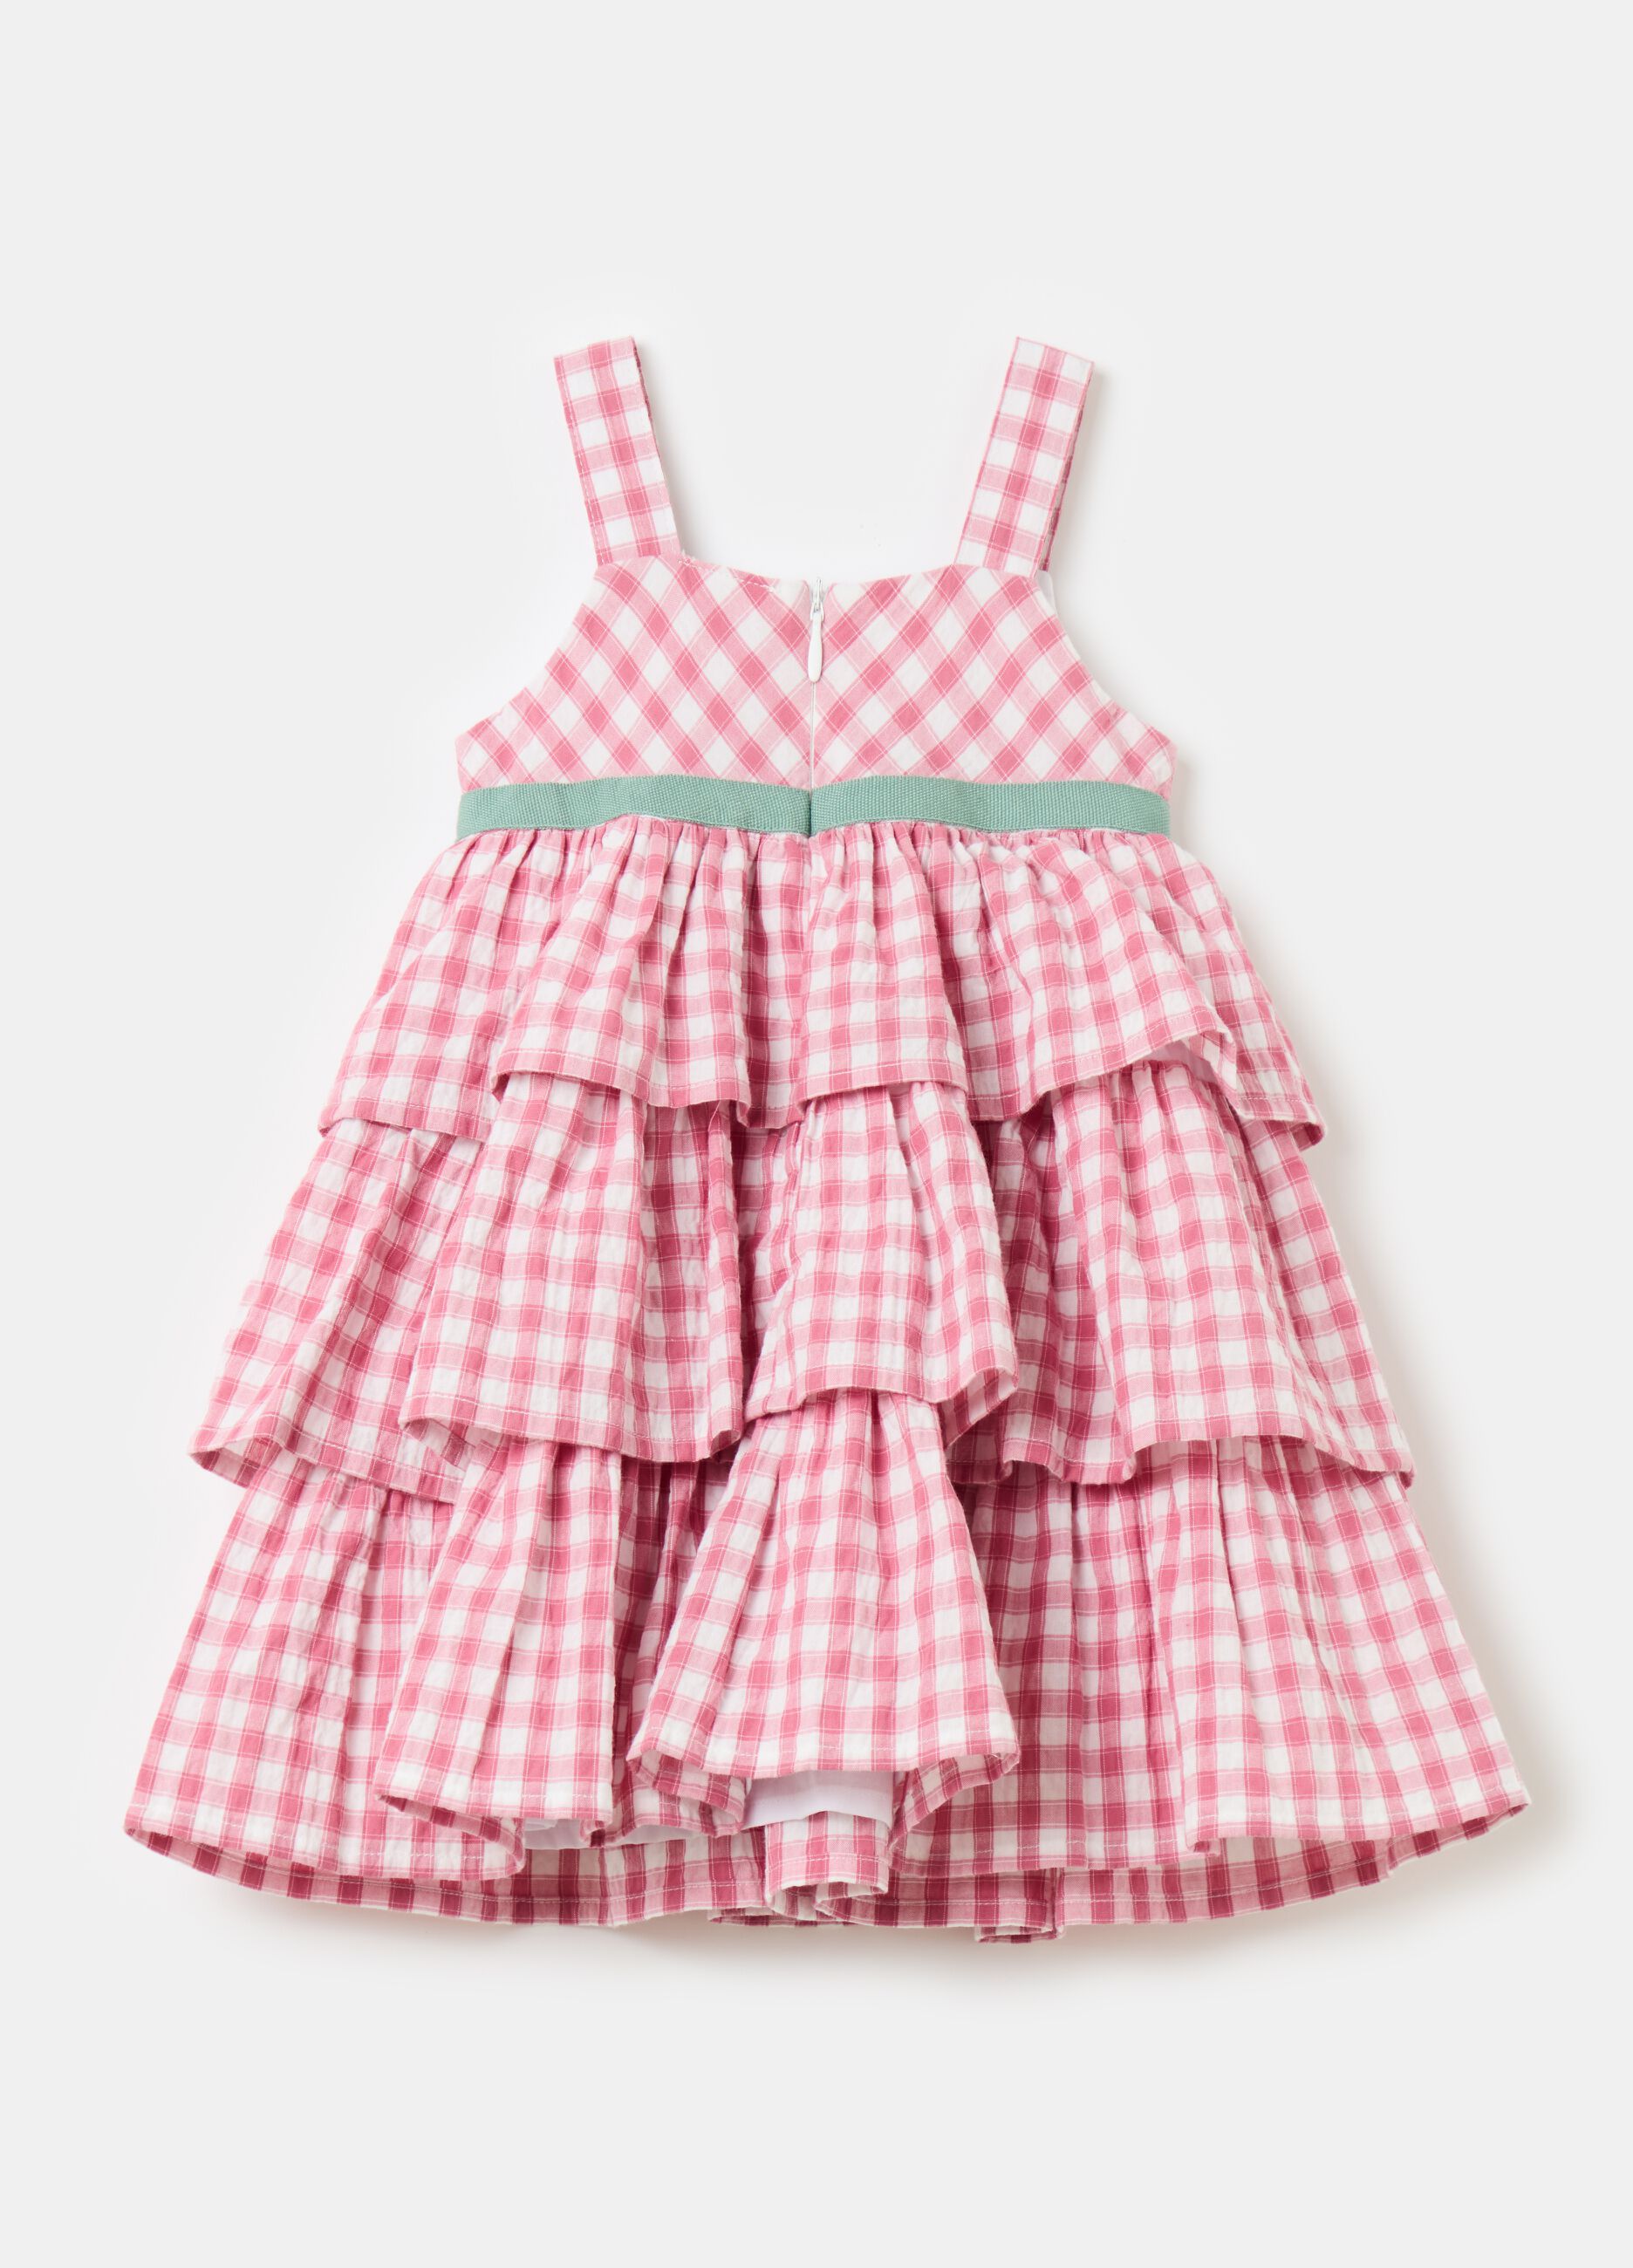 Tiered dress with check pattern